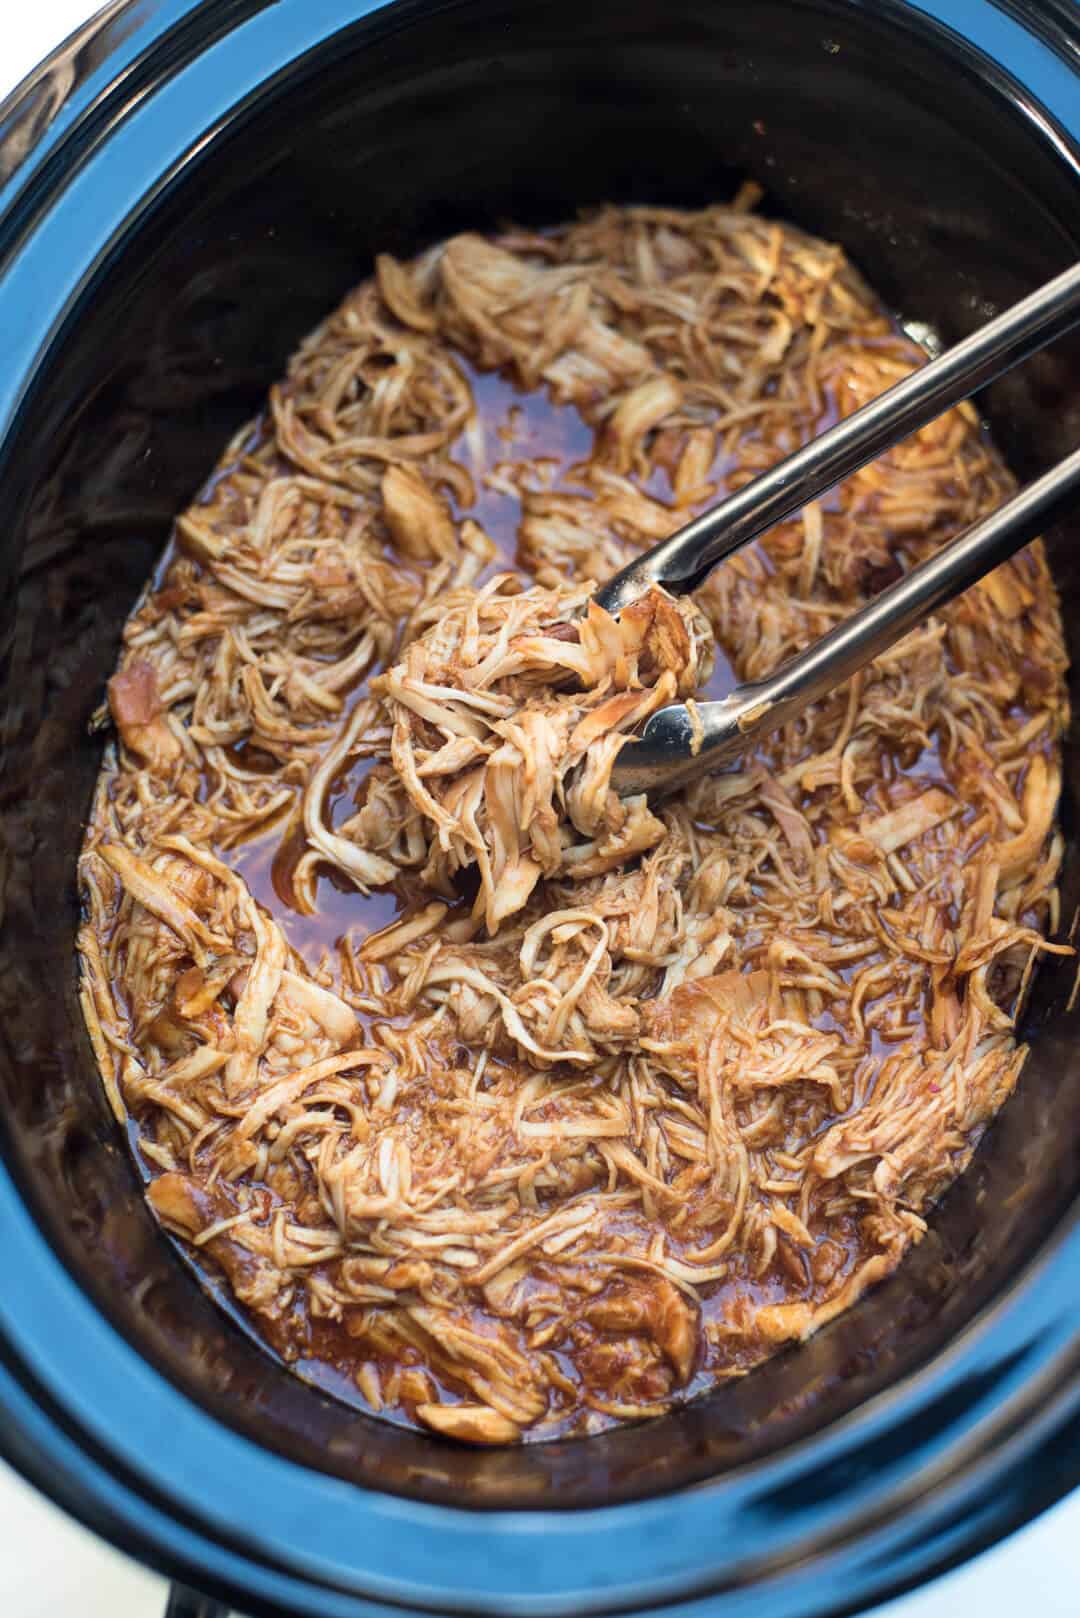 An over the top shot of the shredded BBQ Chicken in the slow cooker with tongs.